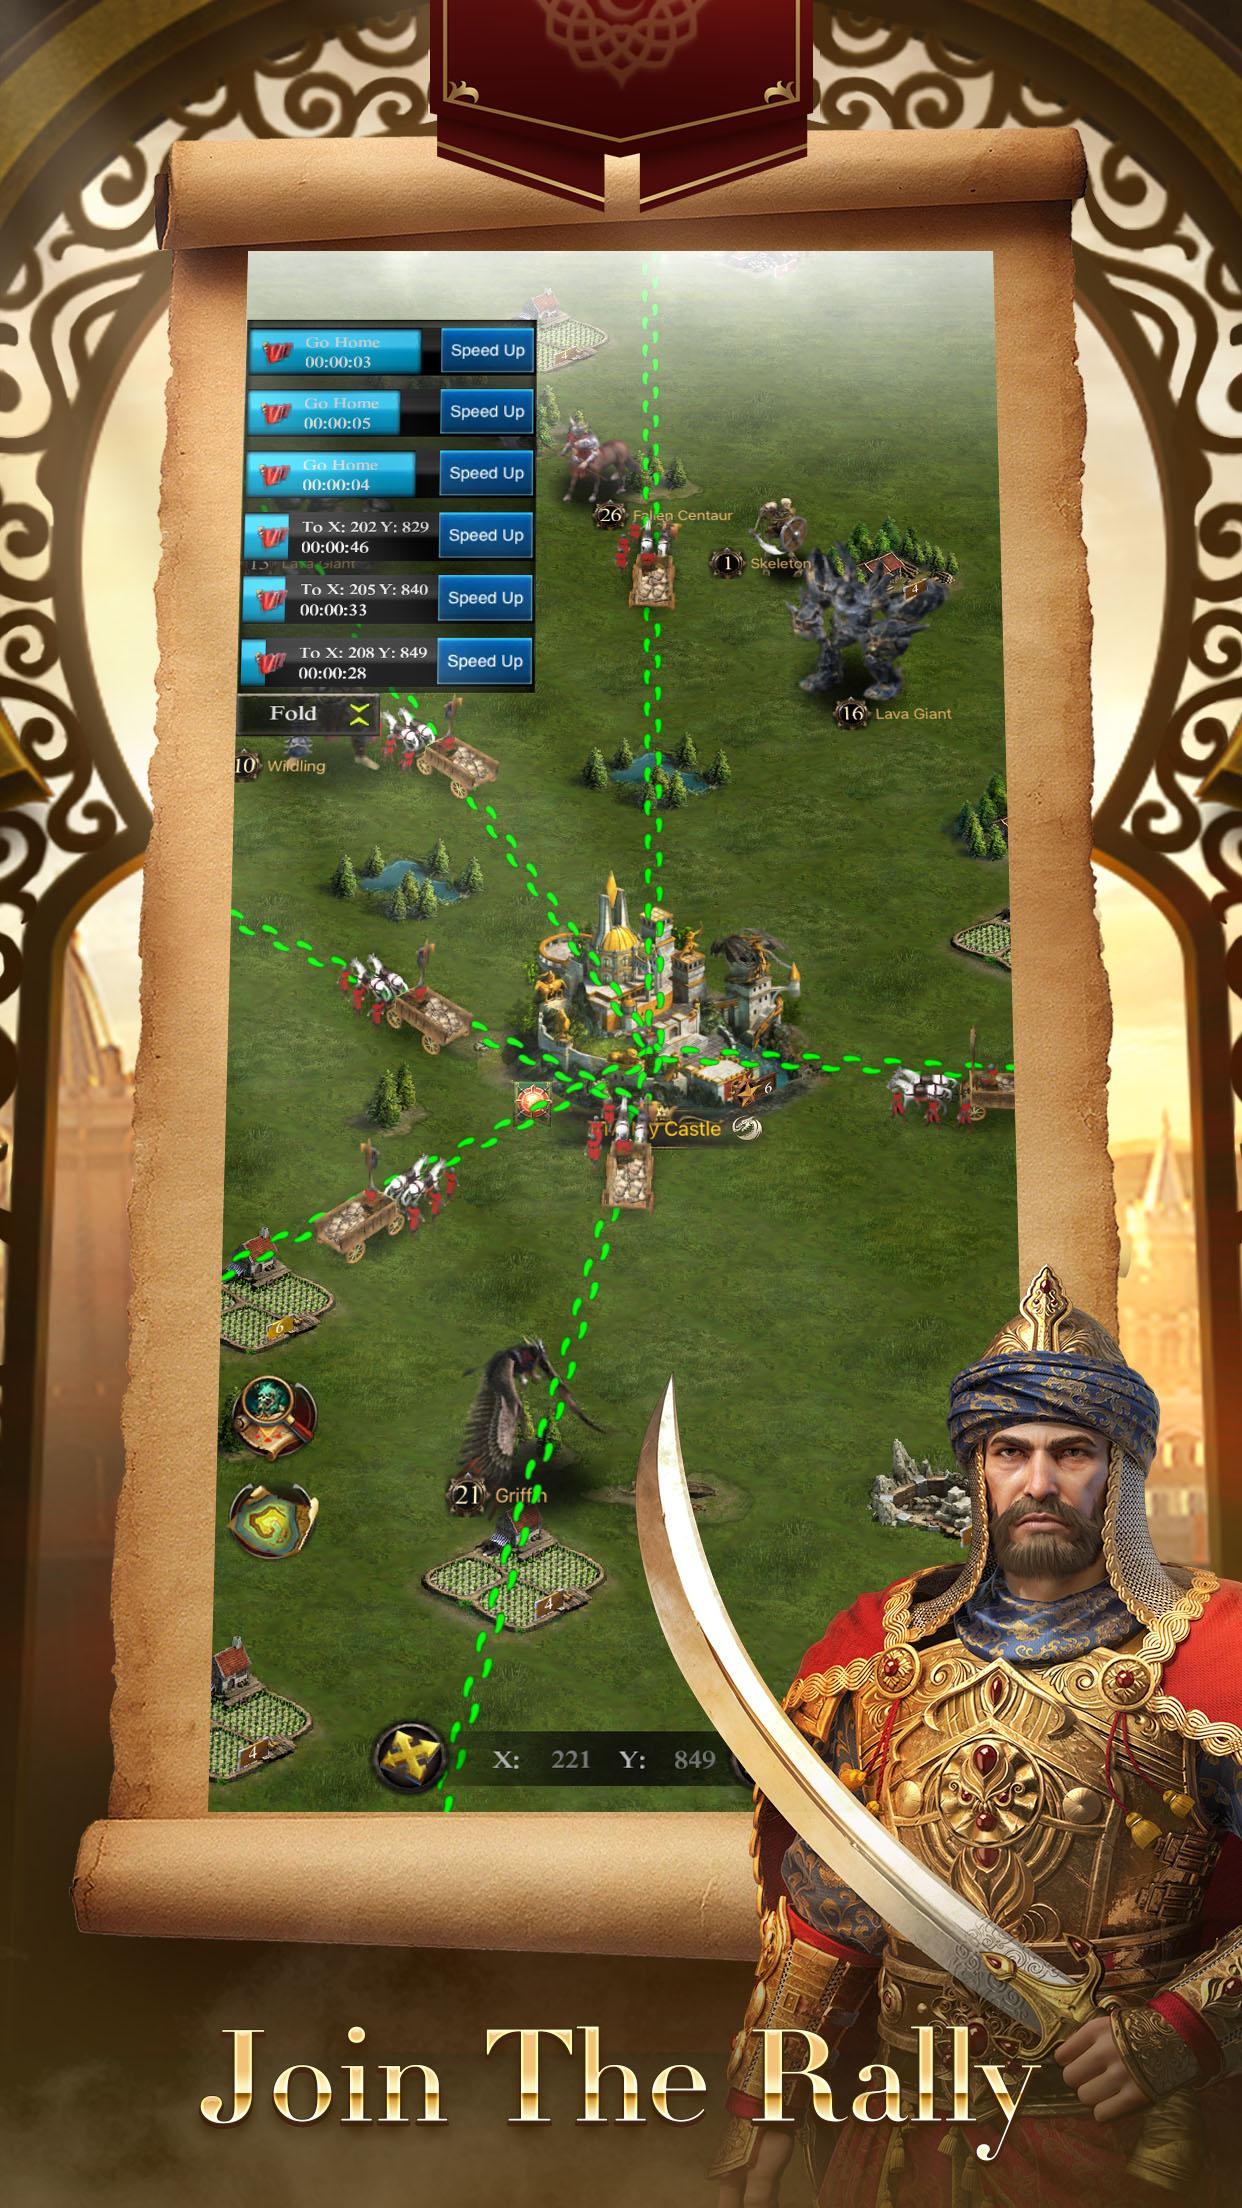 Clash Of Kings For PC (Free Download)